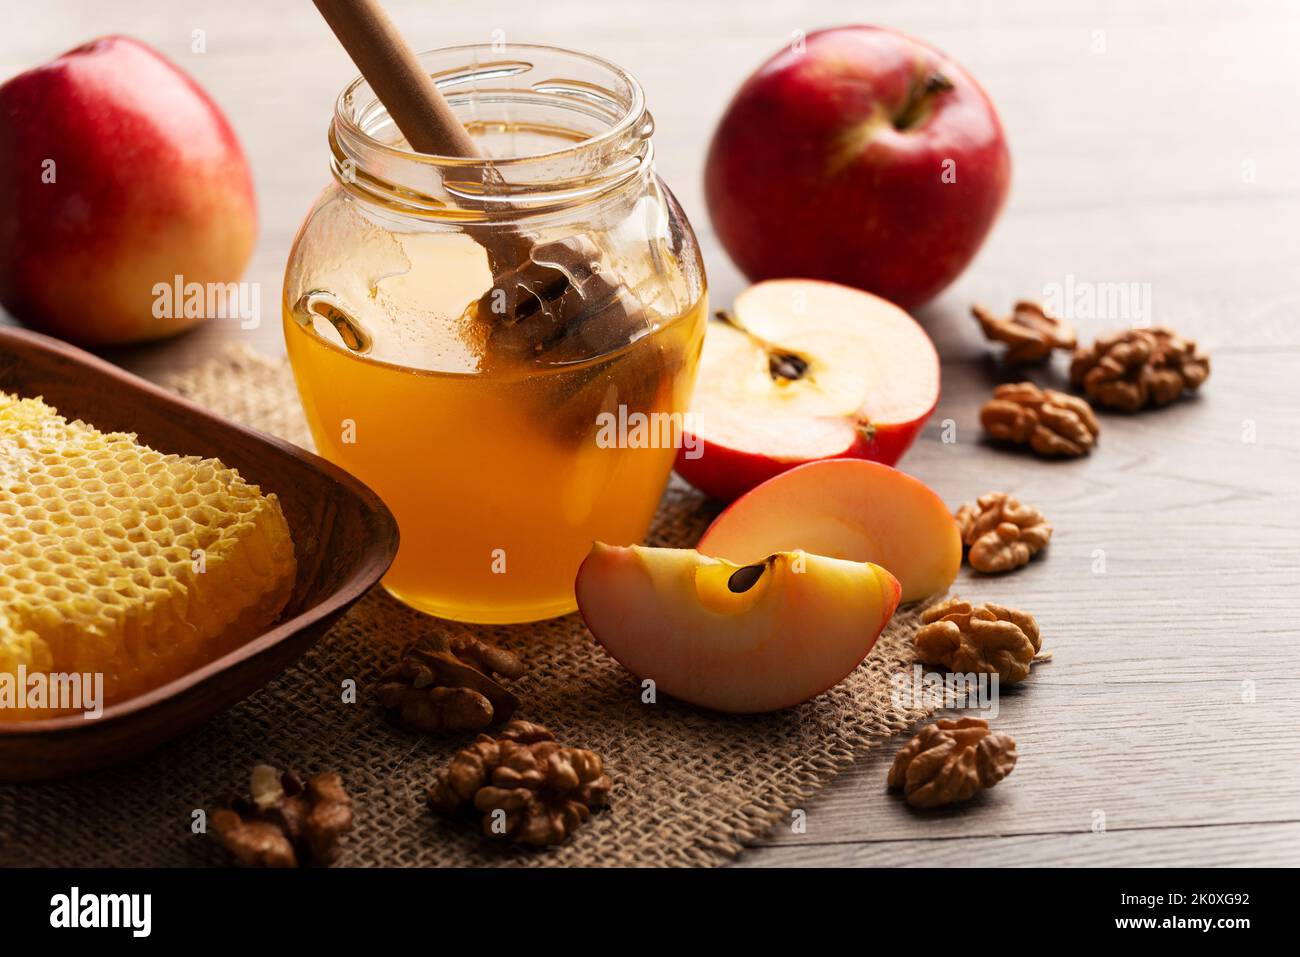 Mason jar with honey, honey dipper, honeycomb, red apples and walnuts on kitchen table Stock Photo